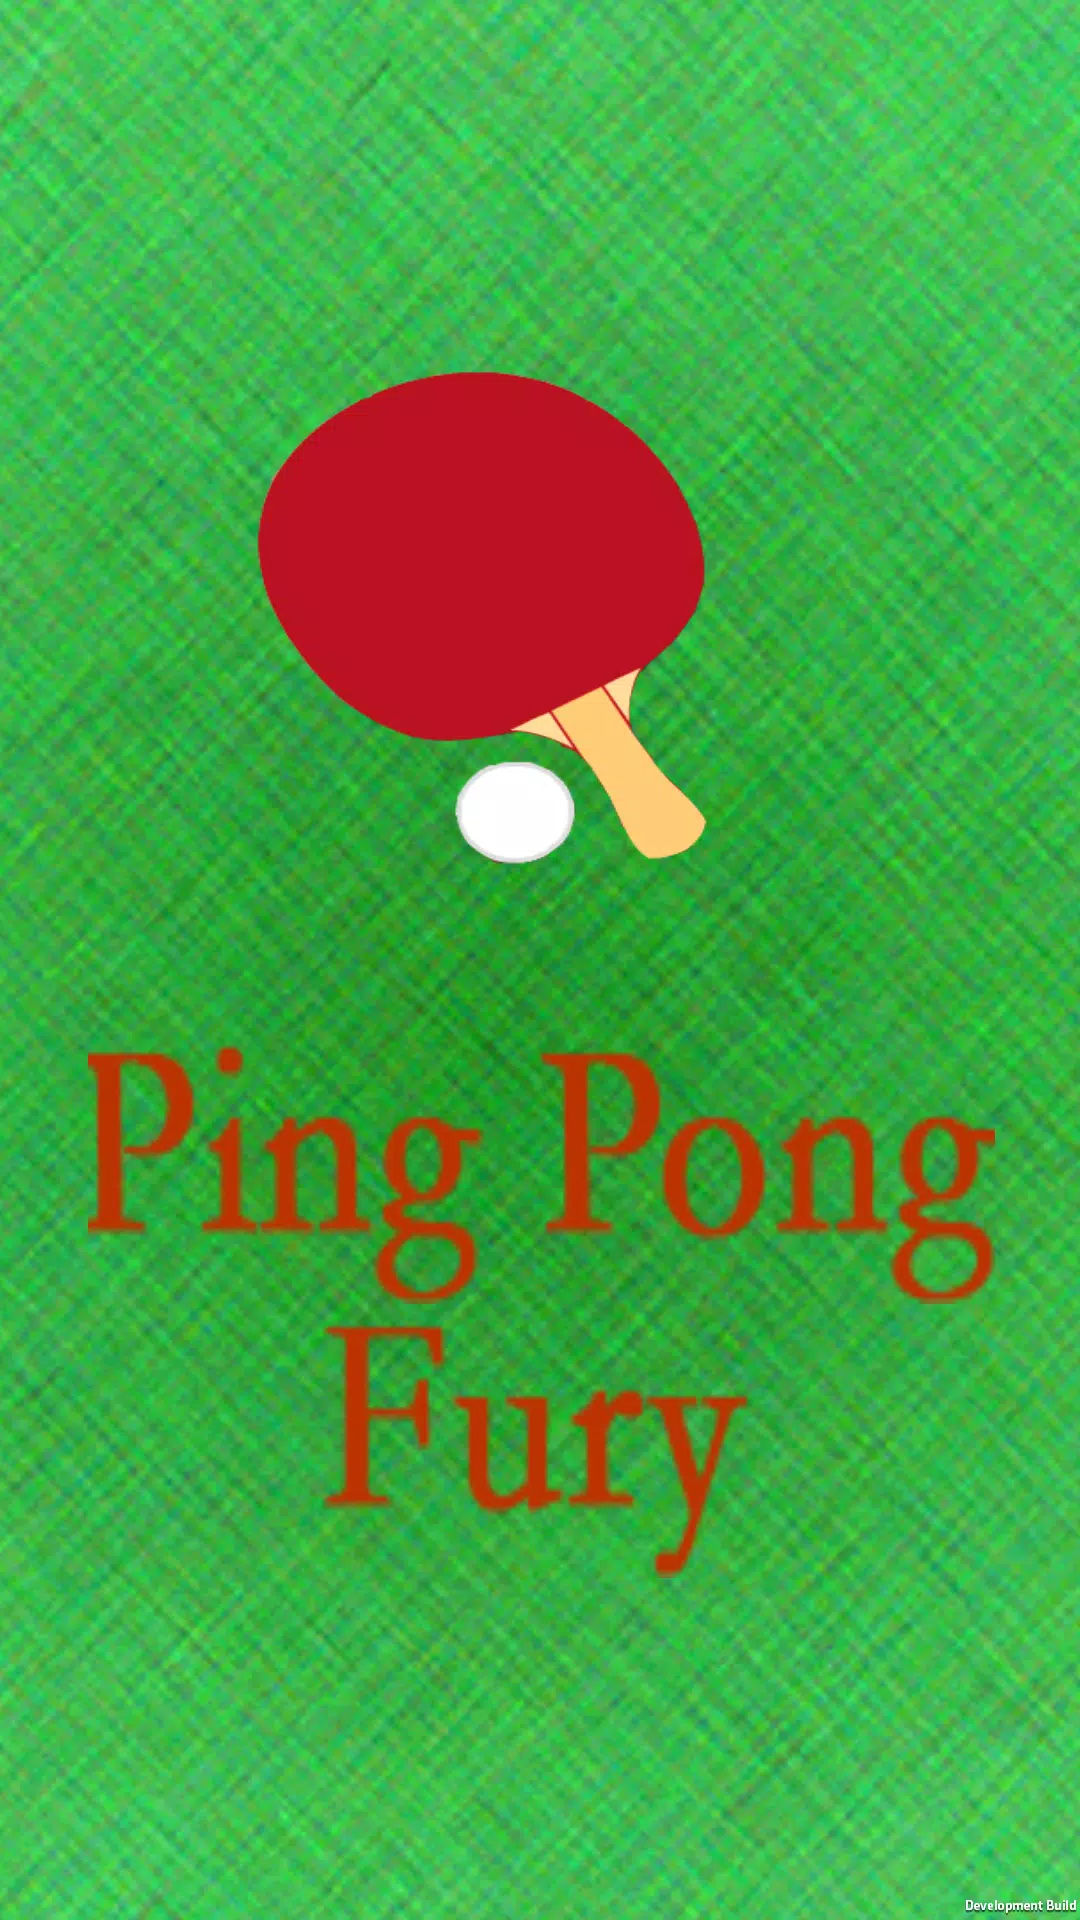 Ping Pong Fury - OUT NOW! 